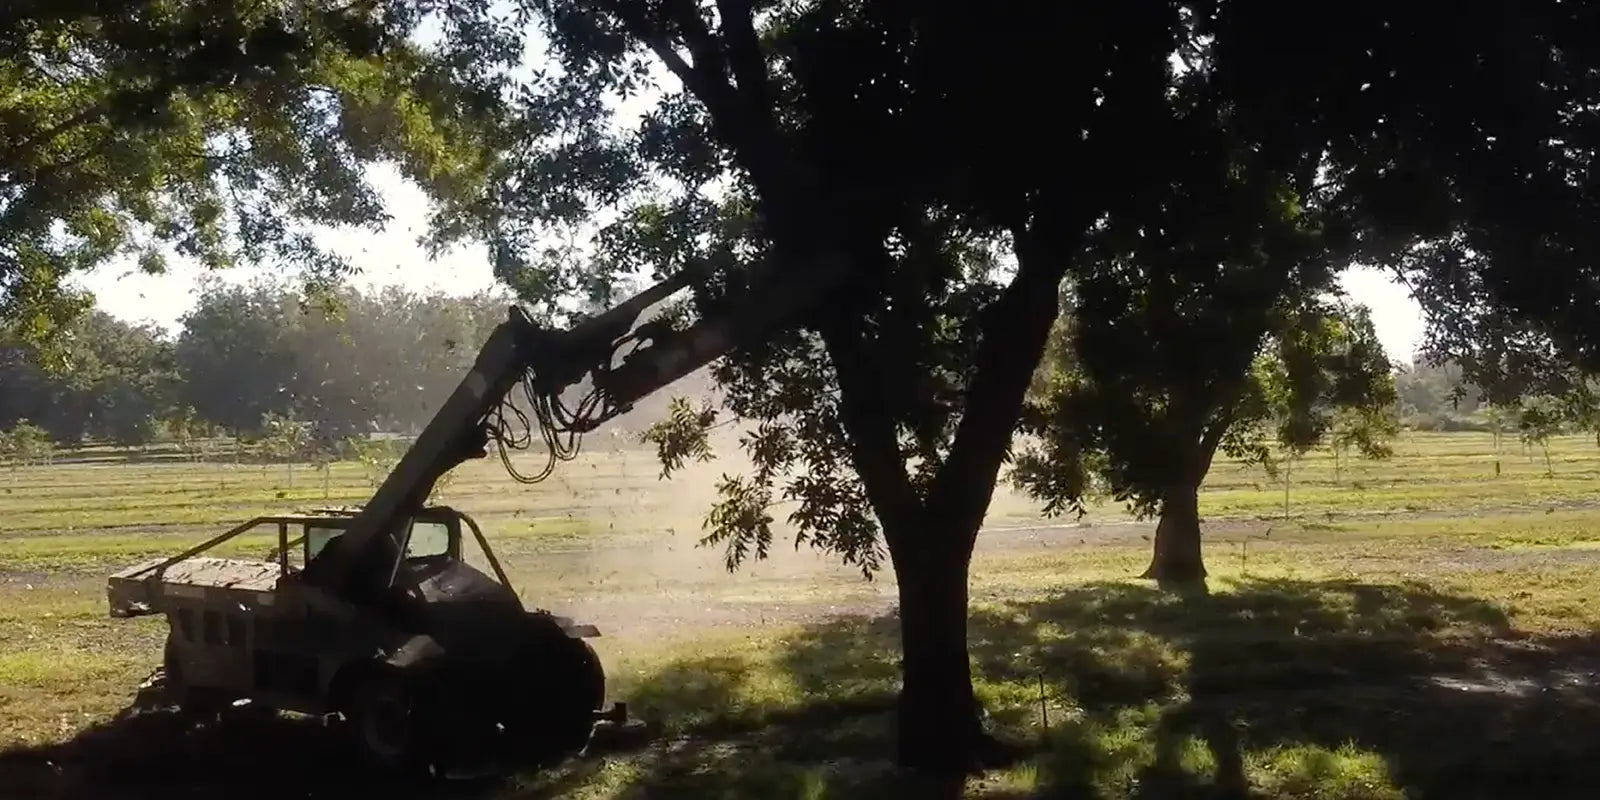 Pecan trees being shaken by specialized machinery